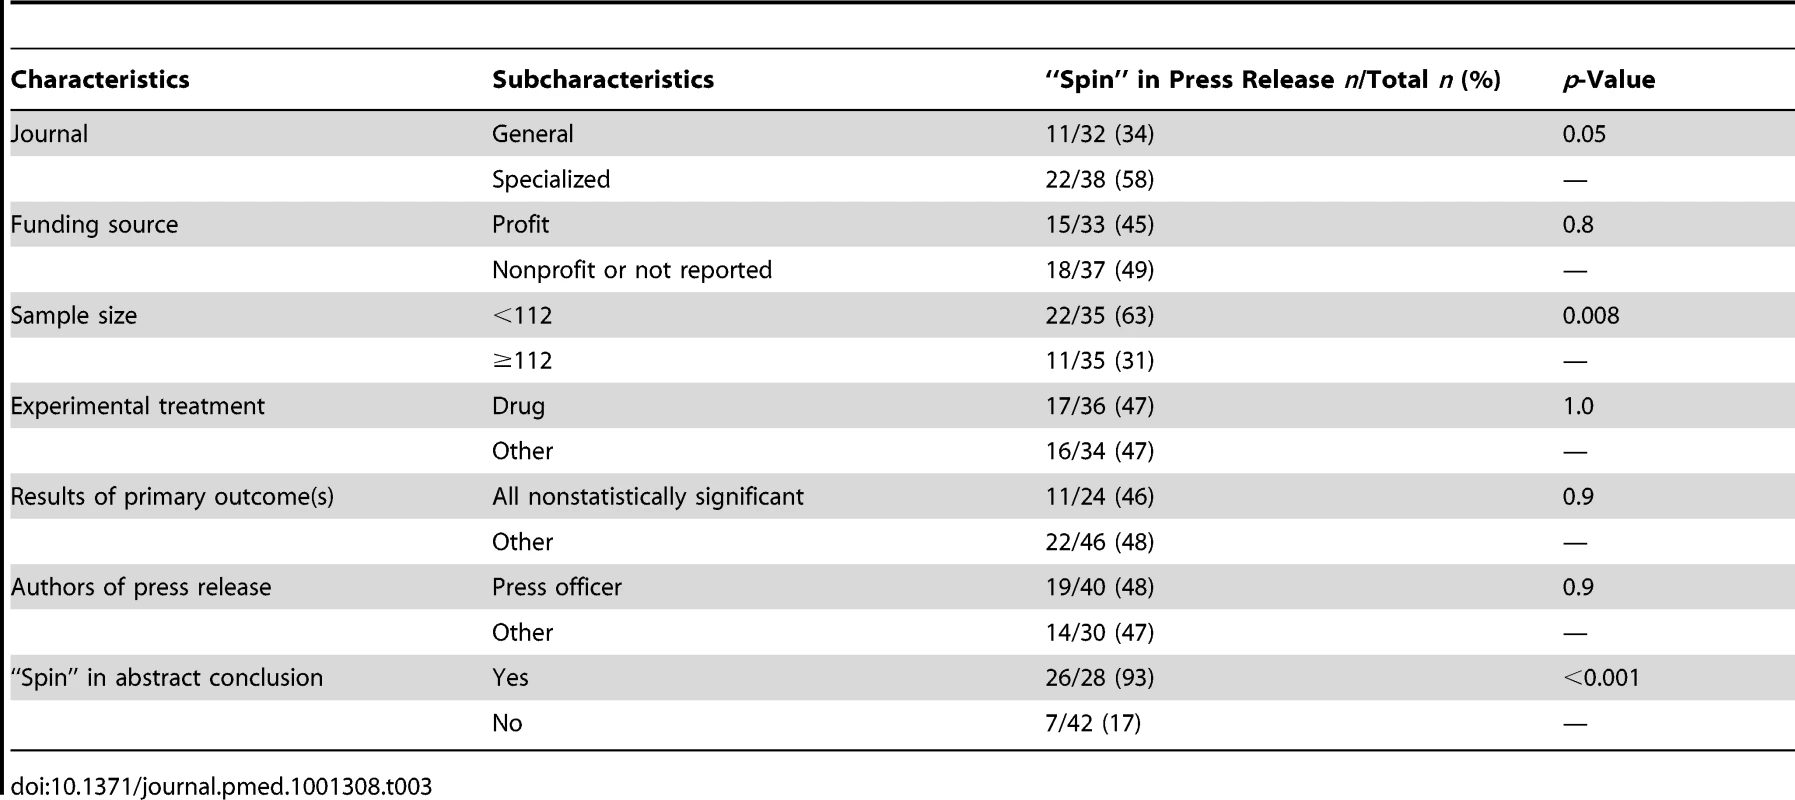 Bivariate analysis of factors associated with and “spin” in the press releases.